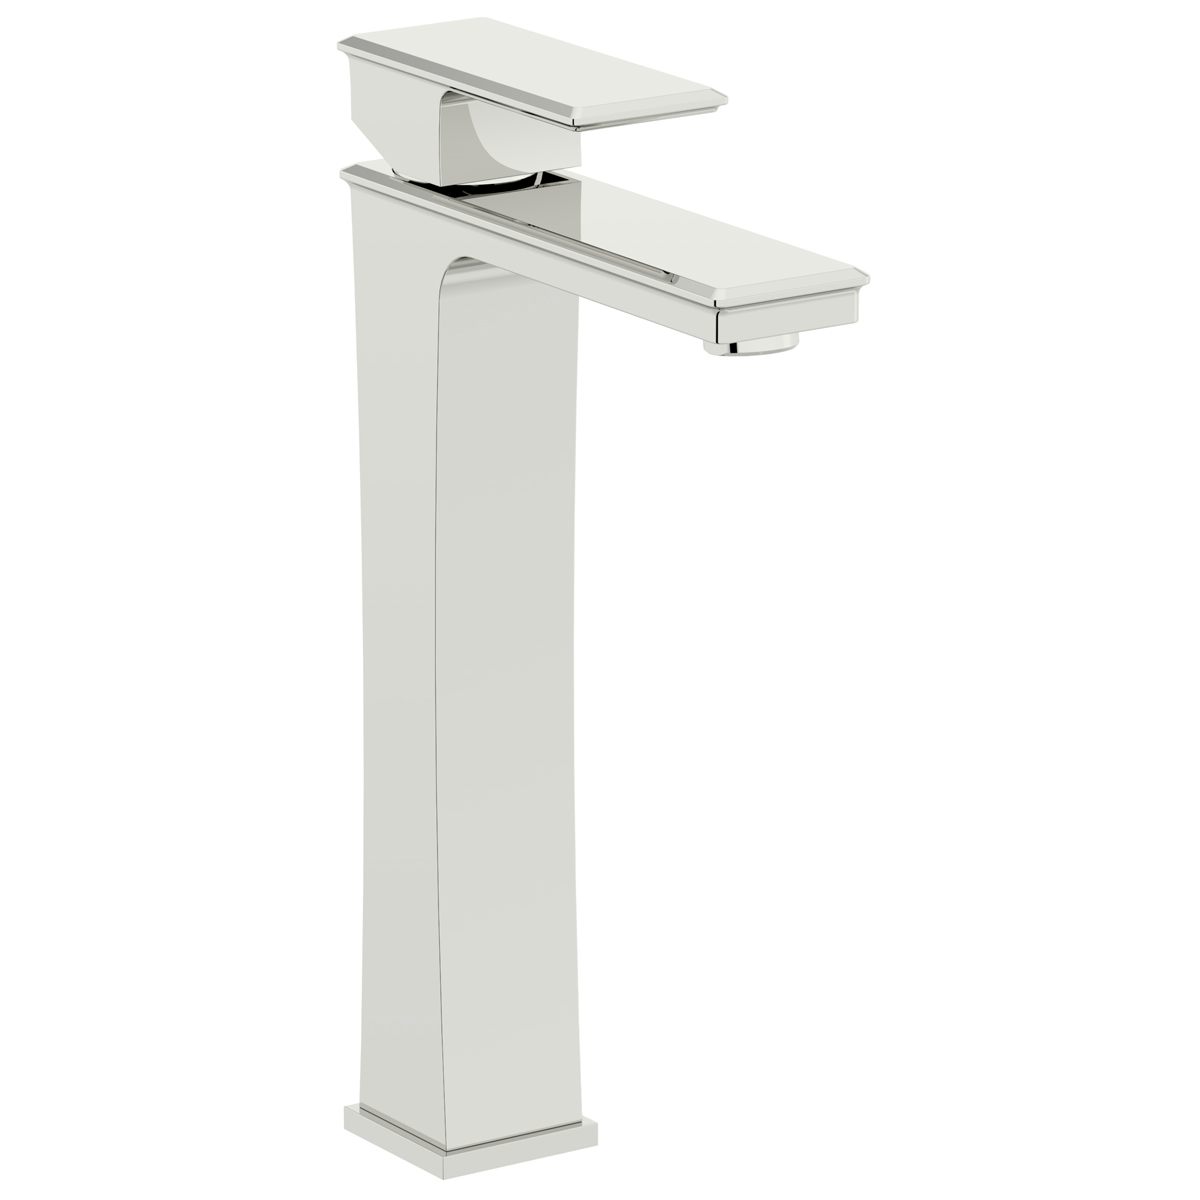 Mode Hale high rise basin mixer tap with slotted waste